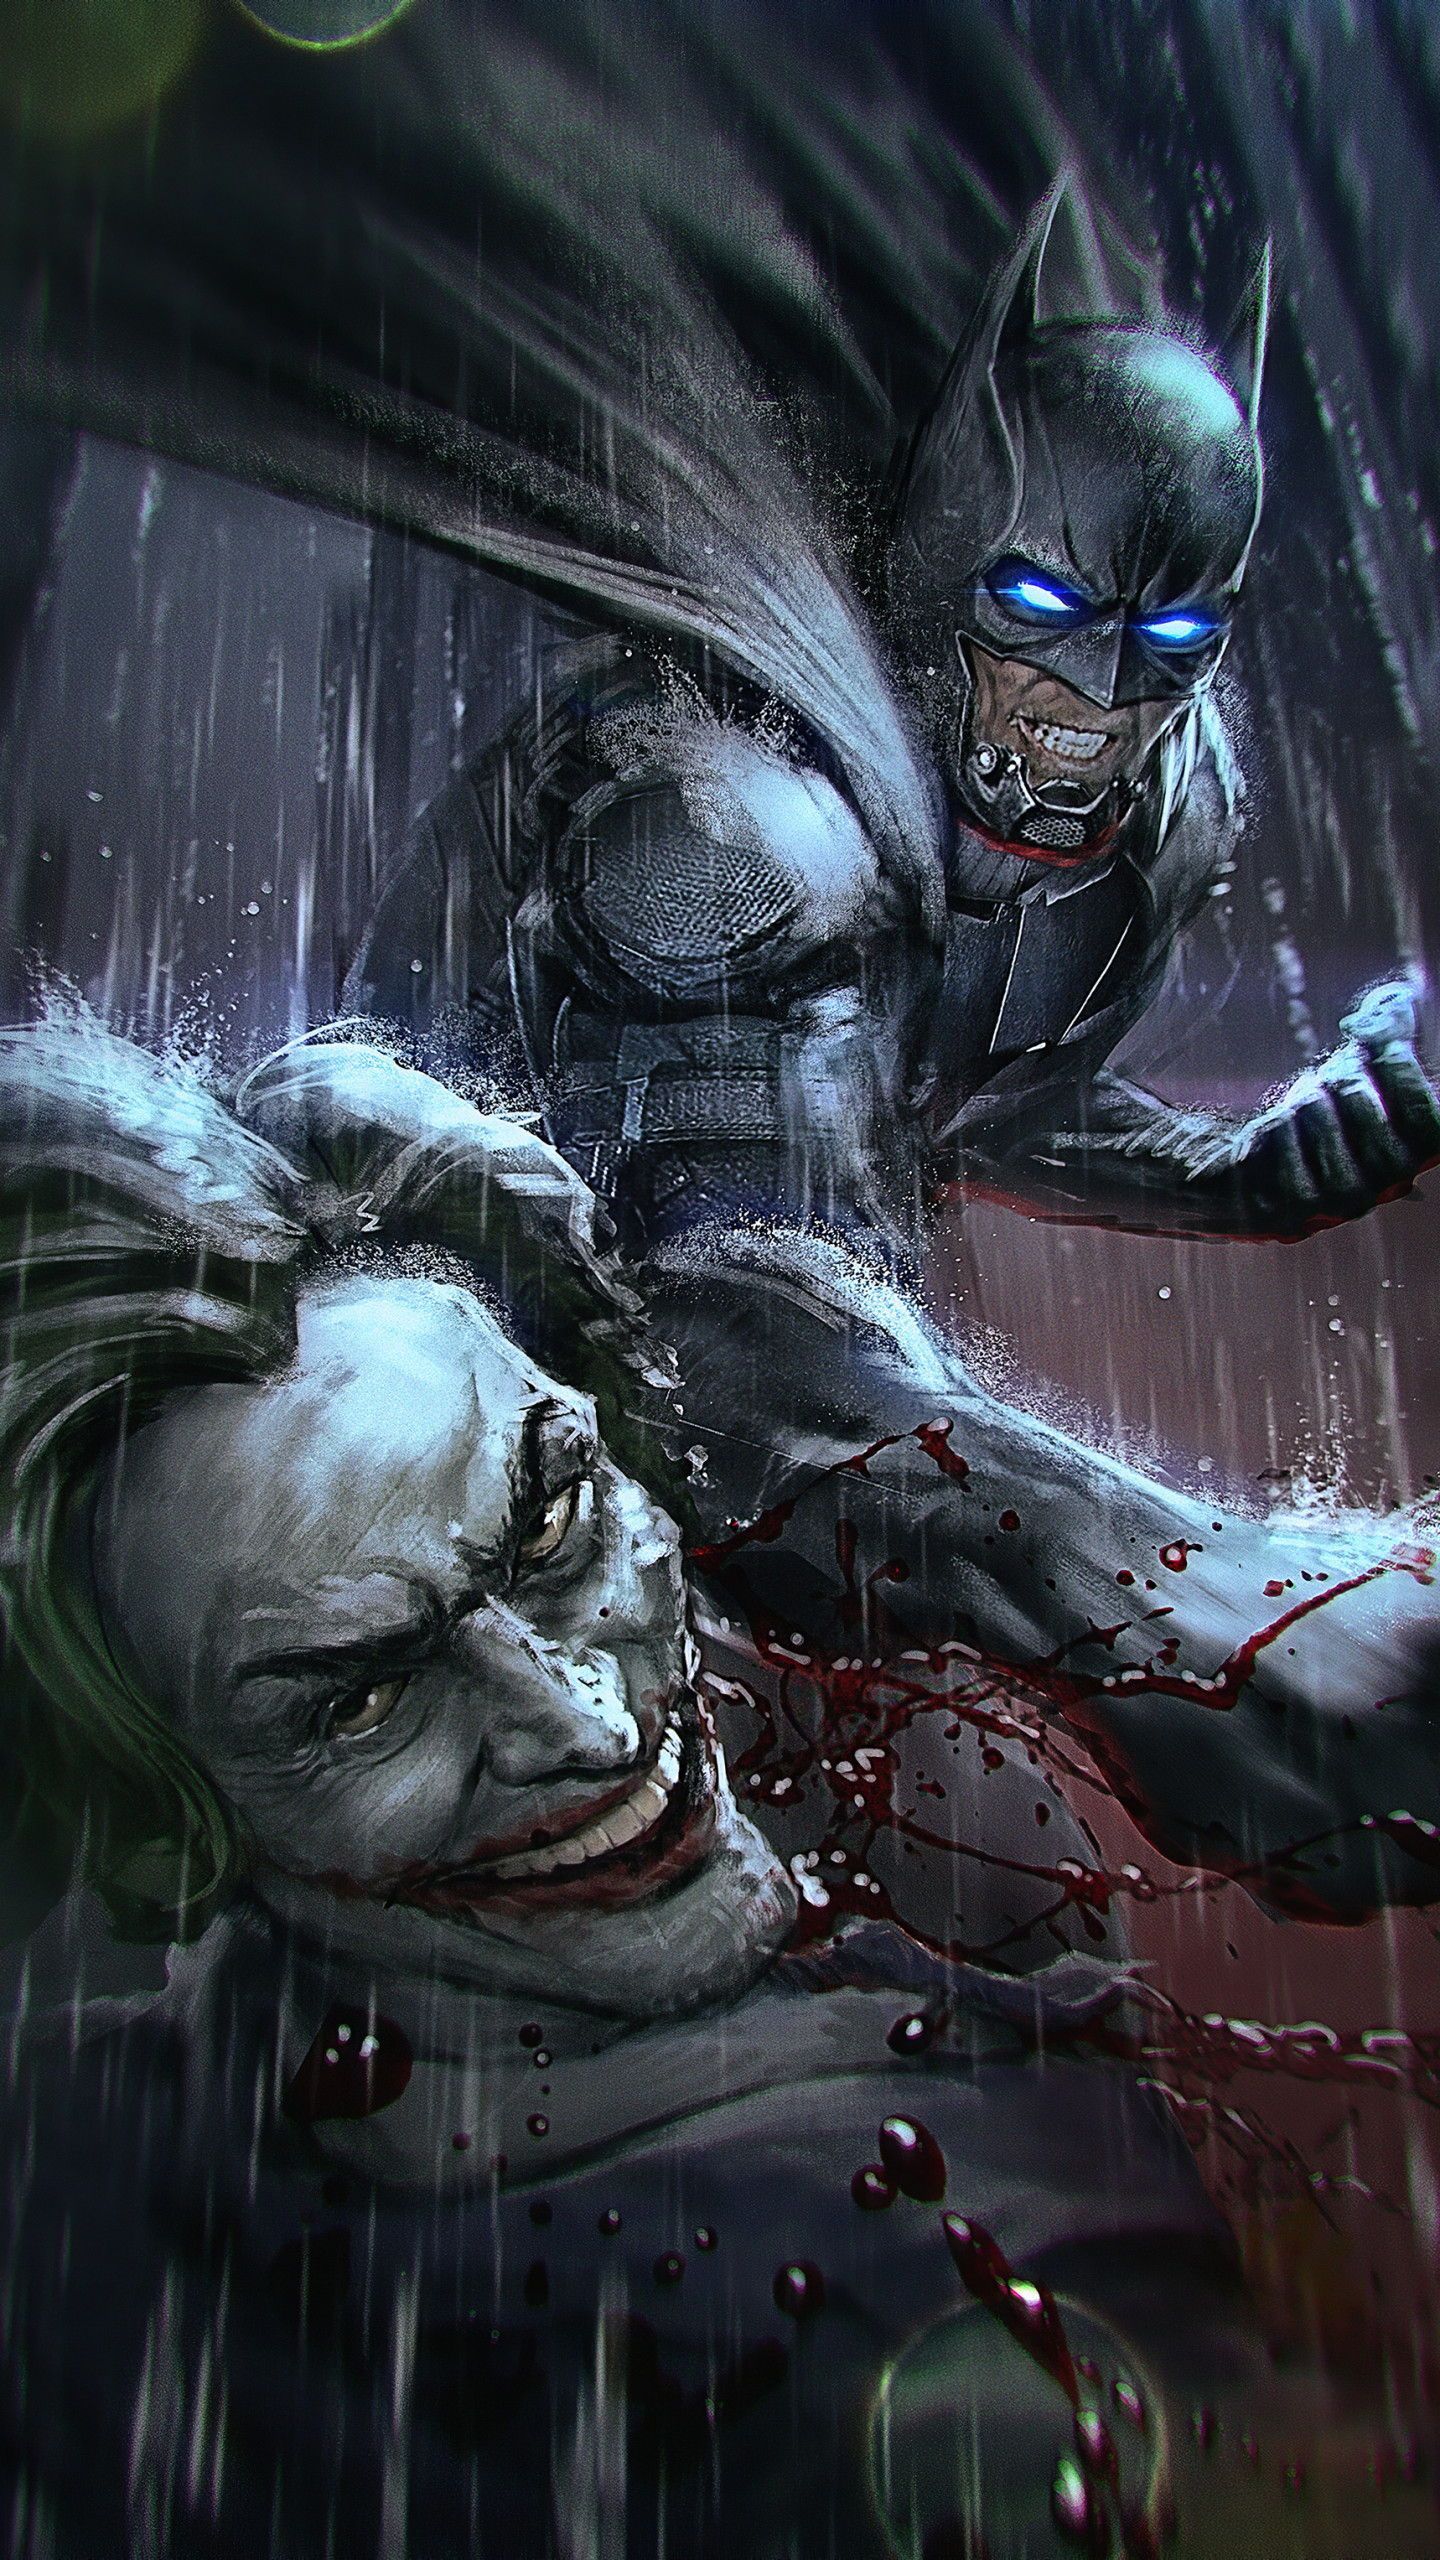 Correct Way to Watch DC Extended Universe Freak. Batman vs joker, Batman vs joker art, Batman art